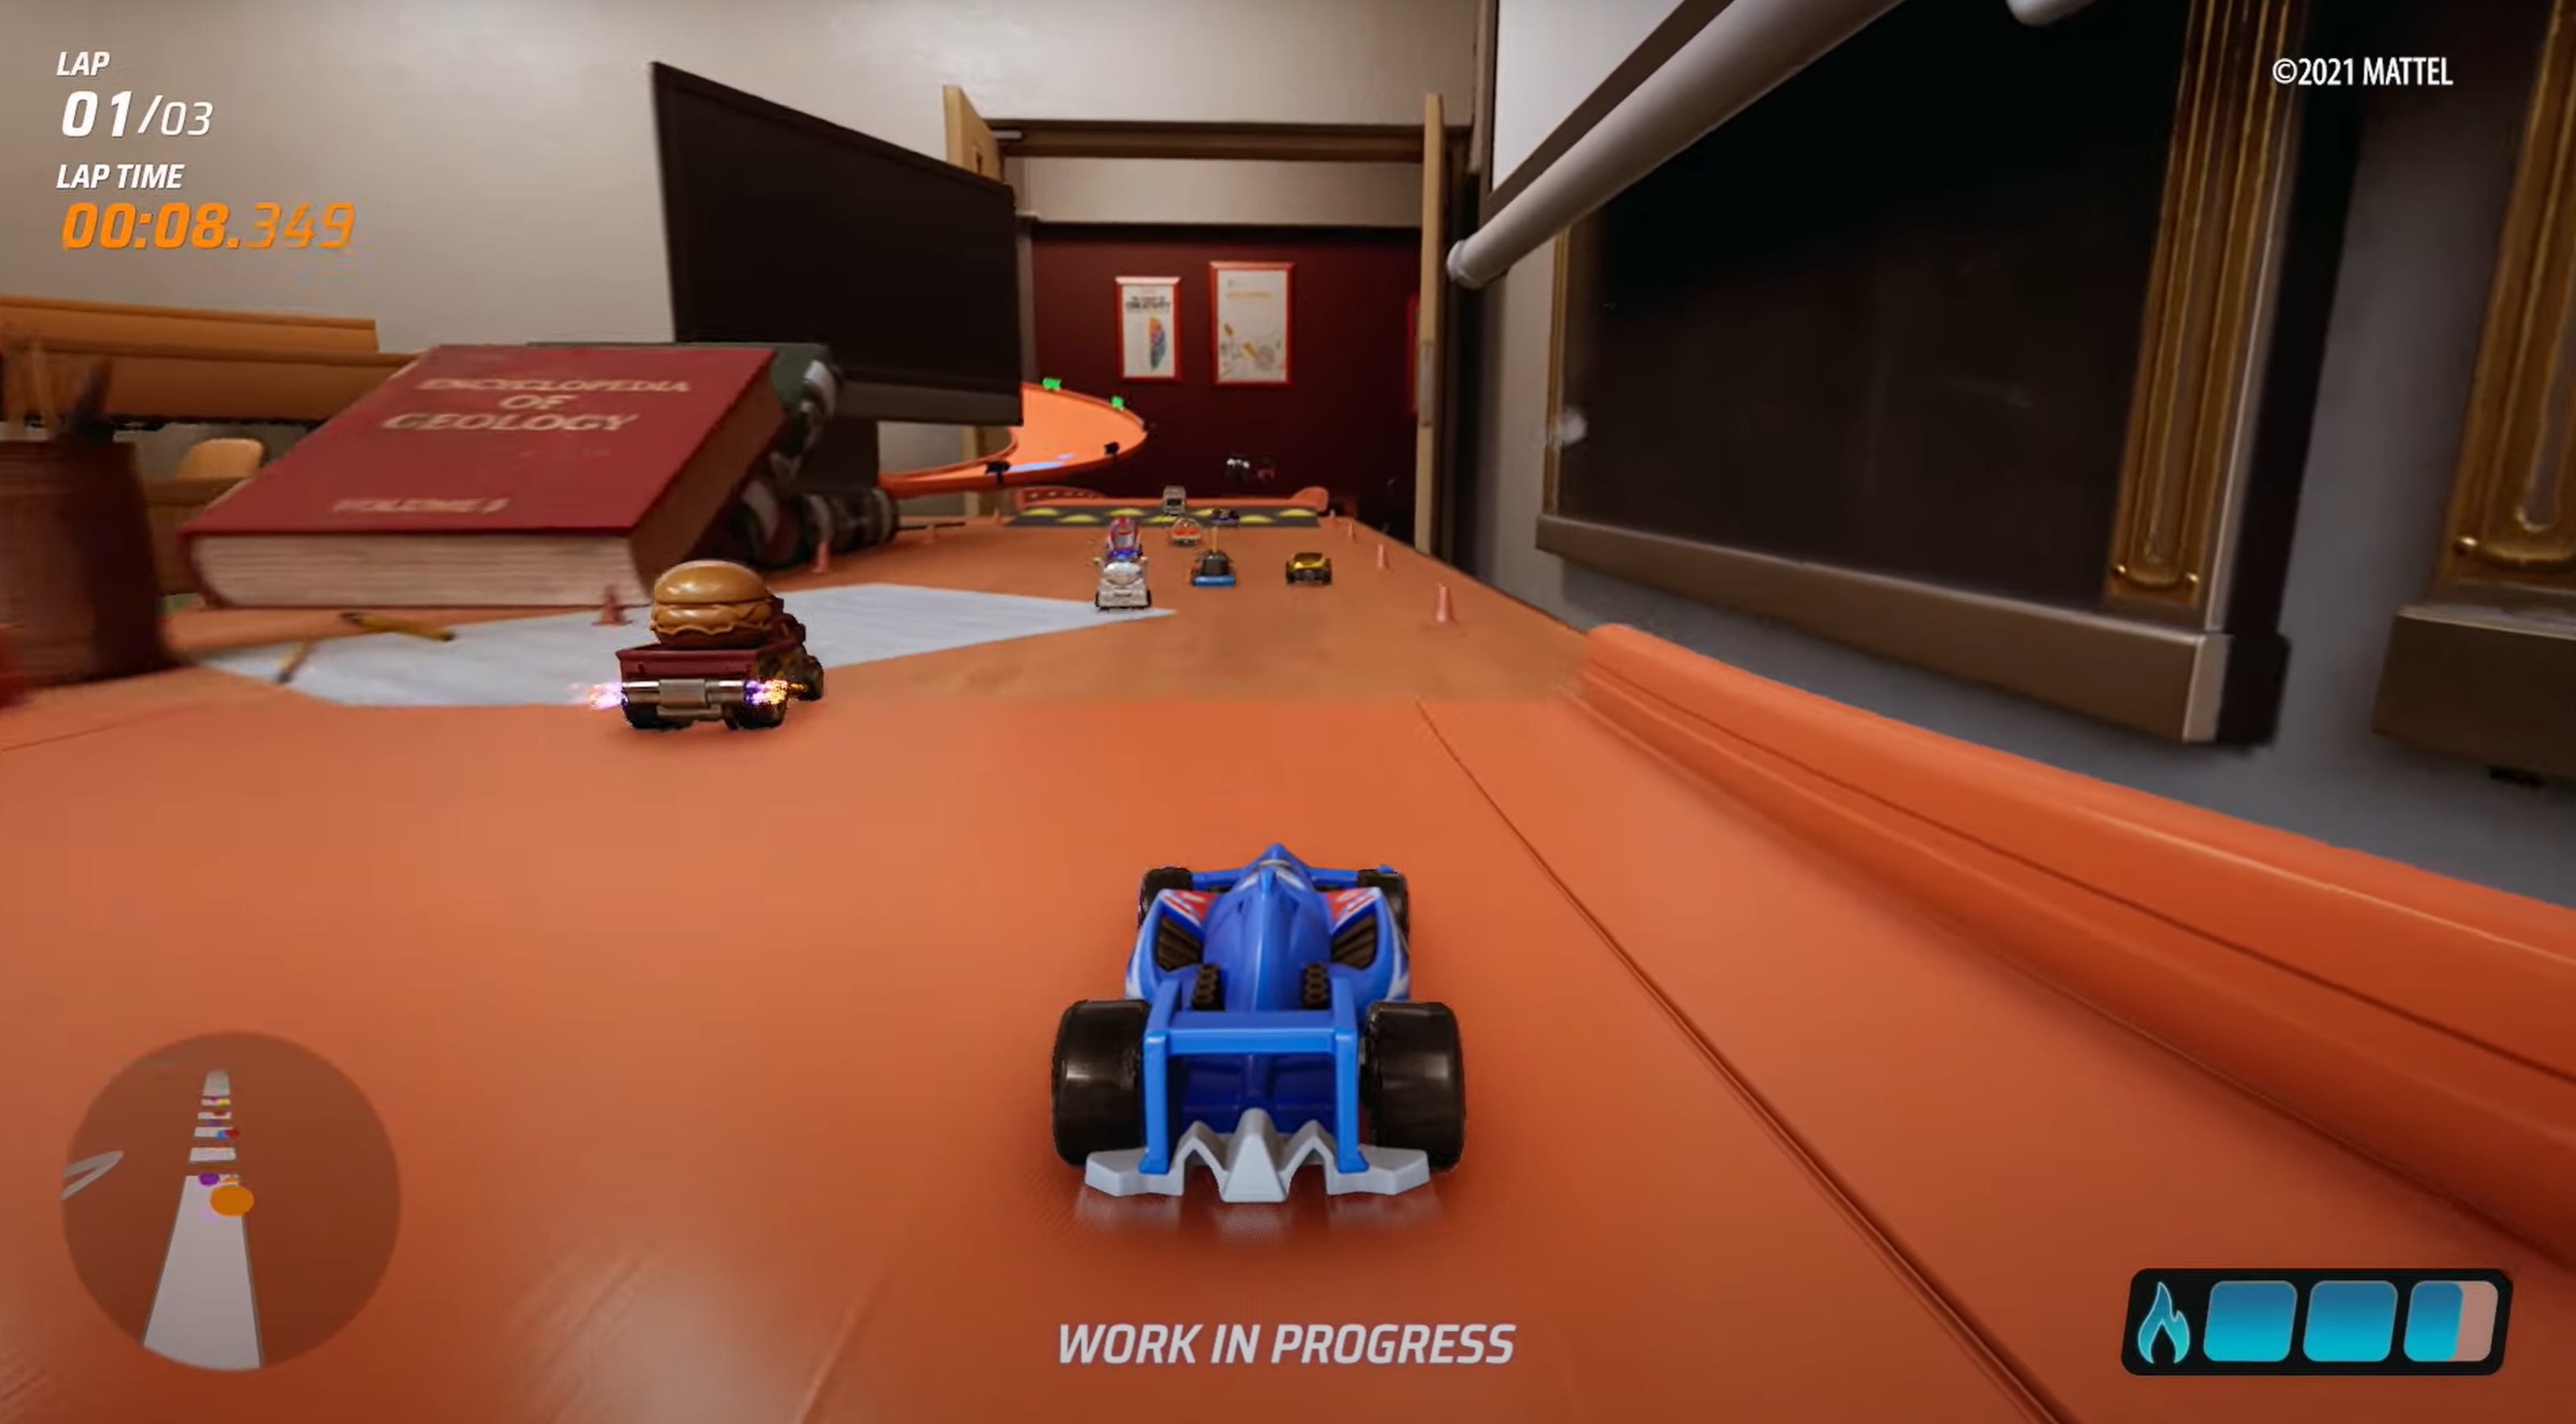 hot wheels unleashed reviews